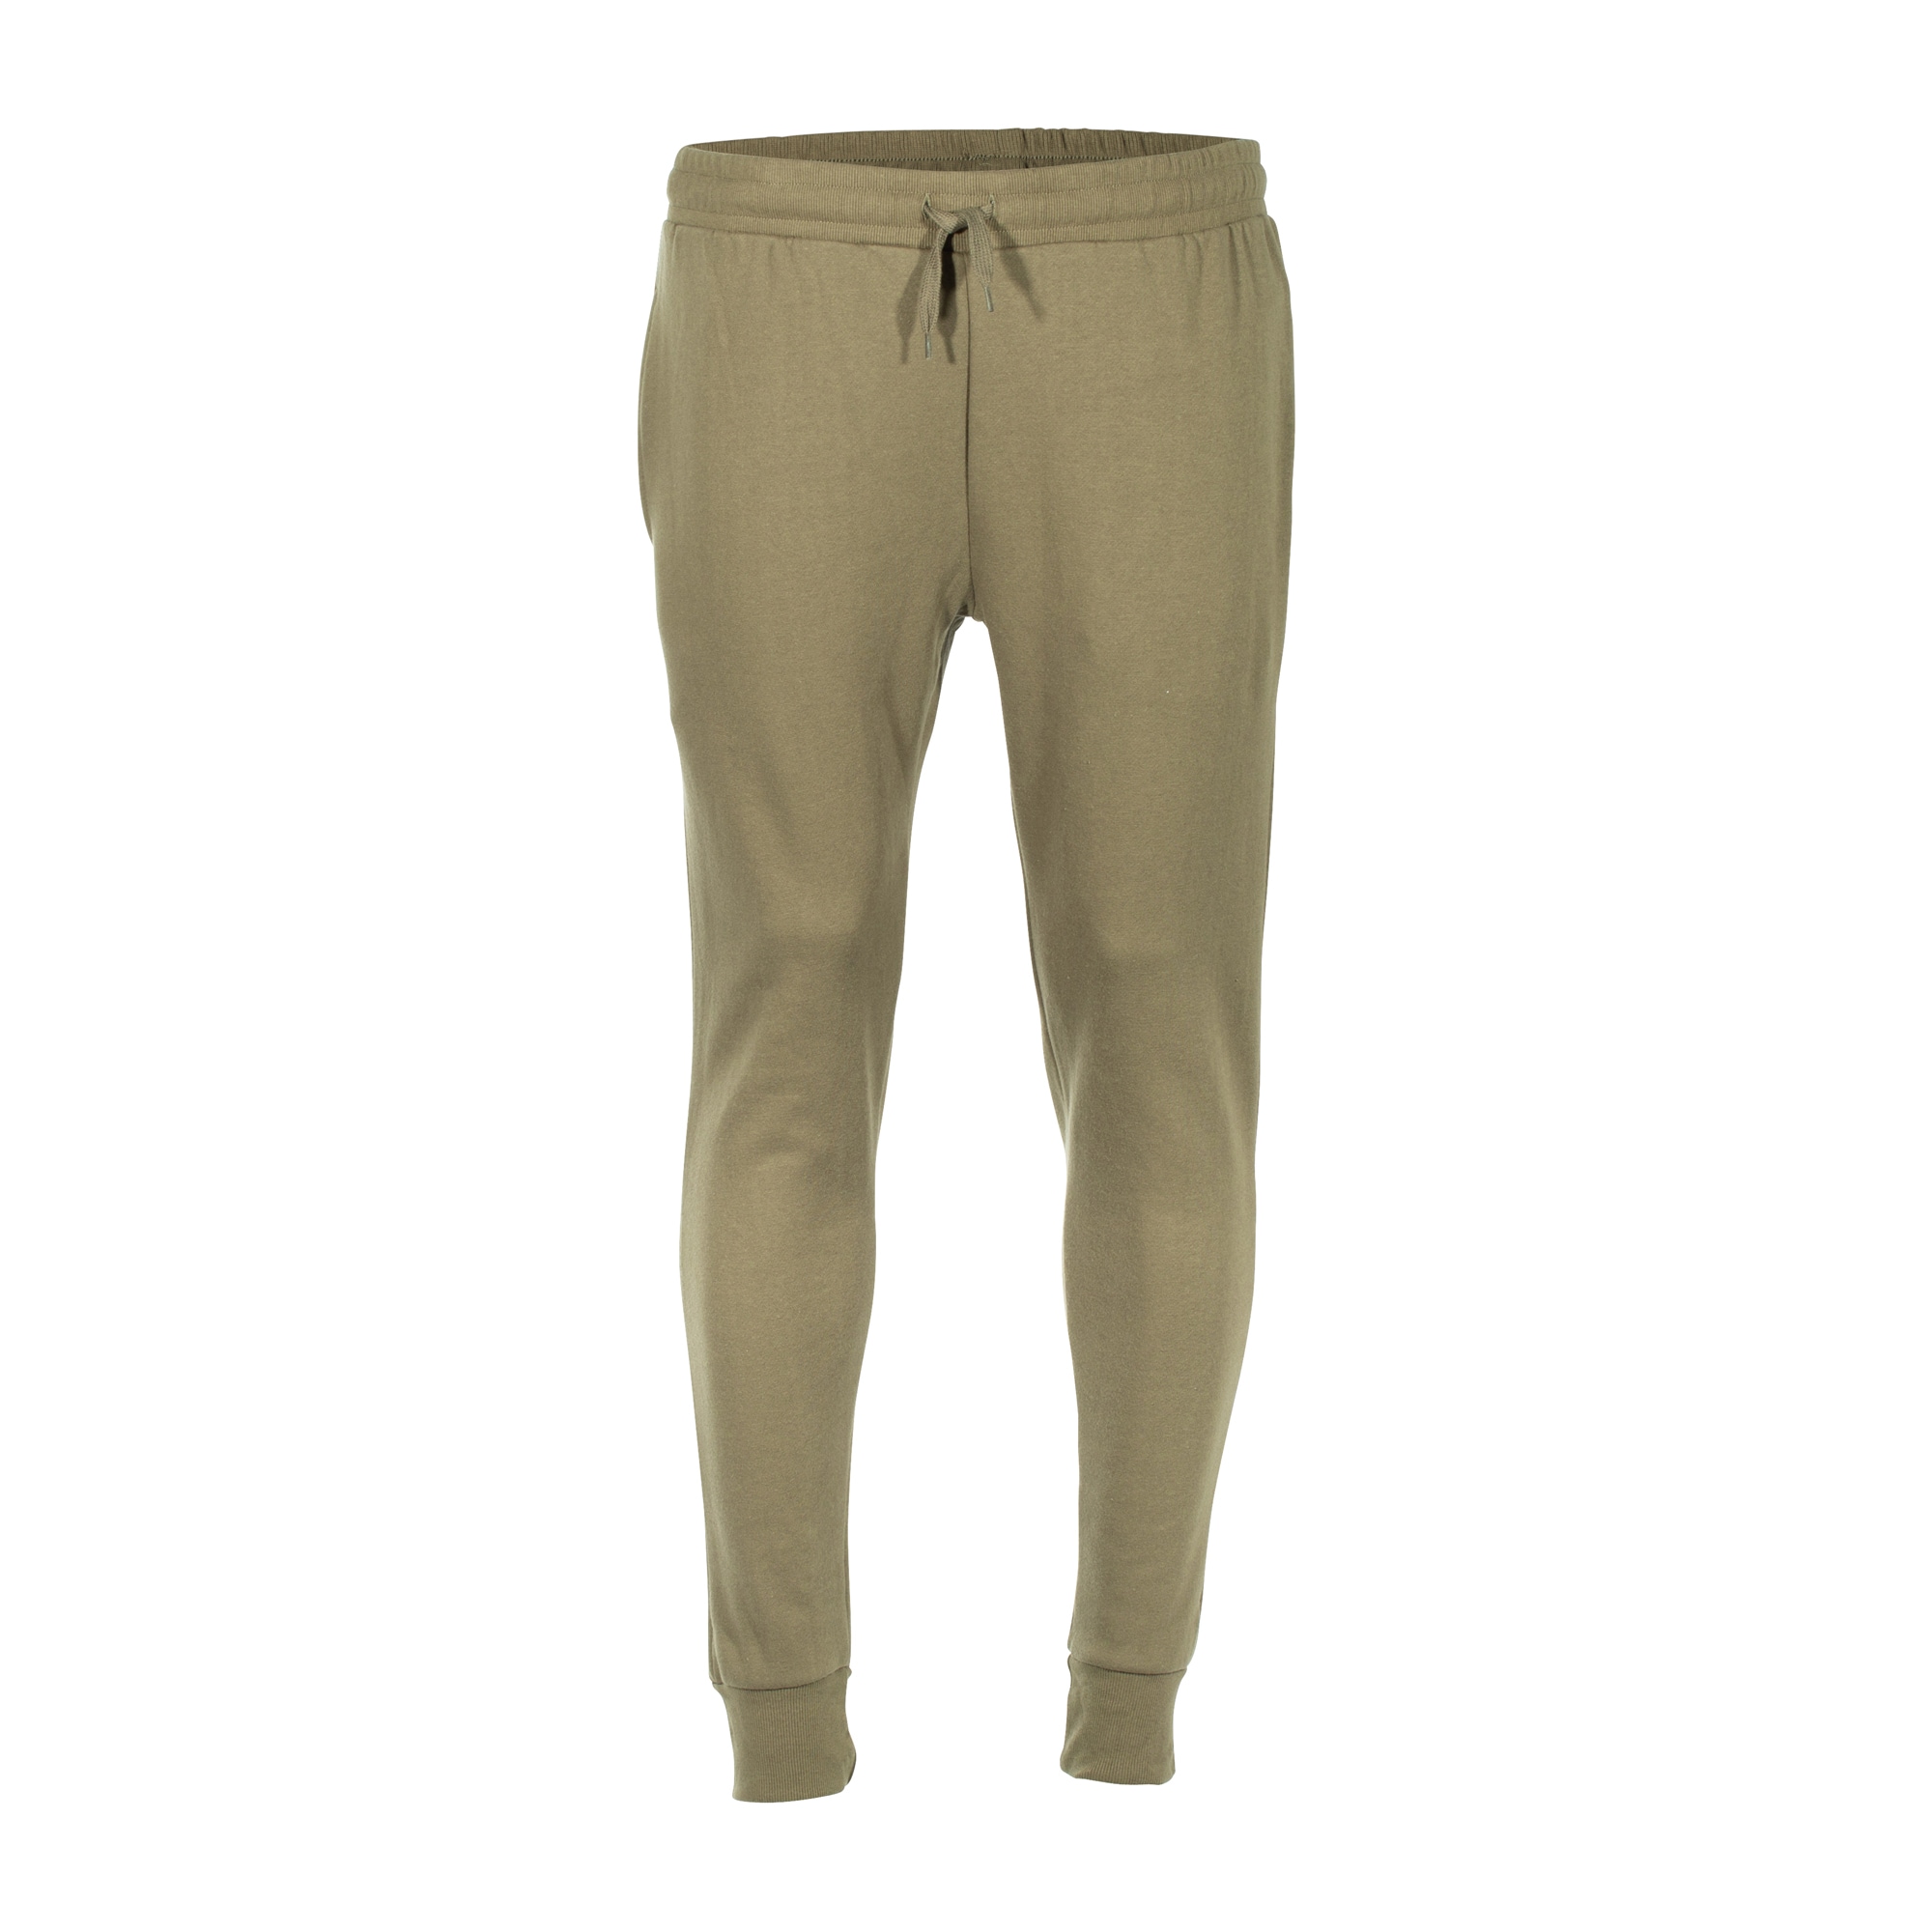 Purchase the MFH Jogger Training Pants olive by ASMC